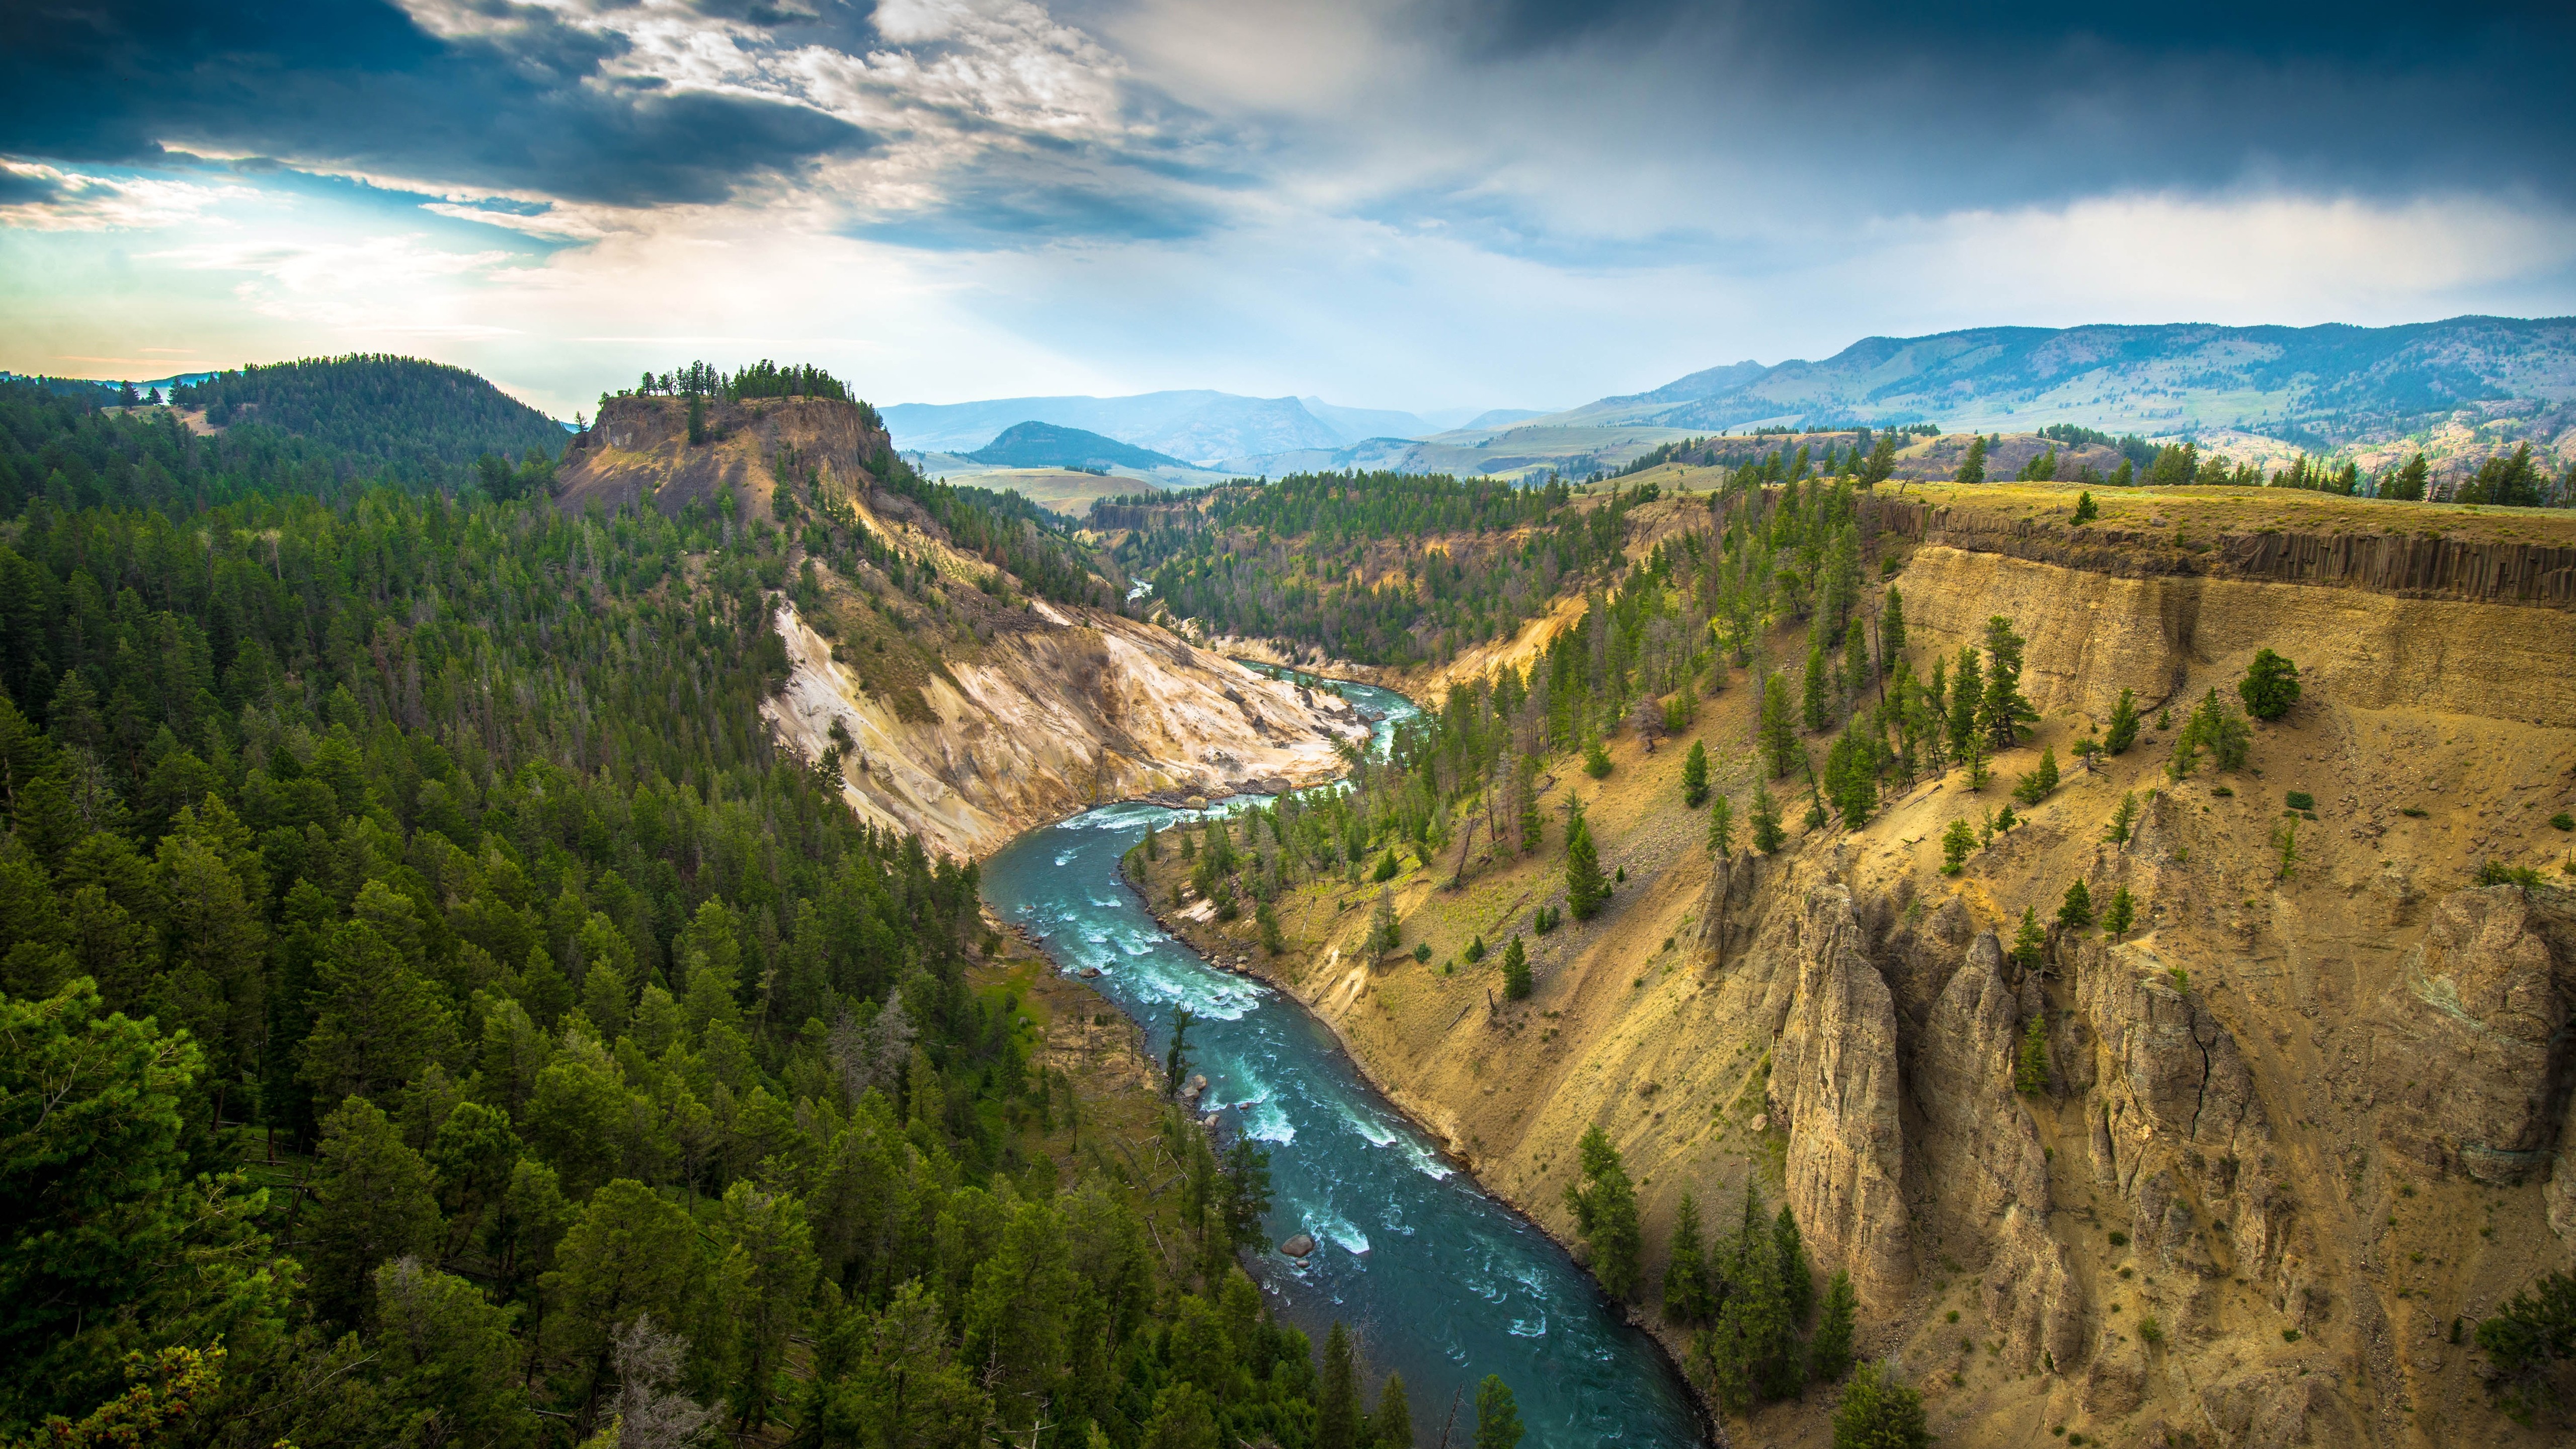 Landscape Yellowstone National Park River 5120x2880